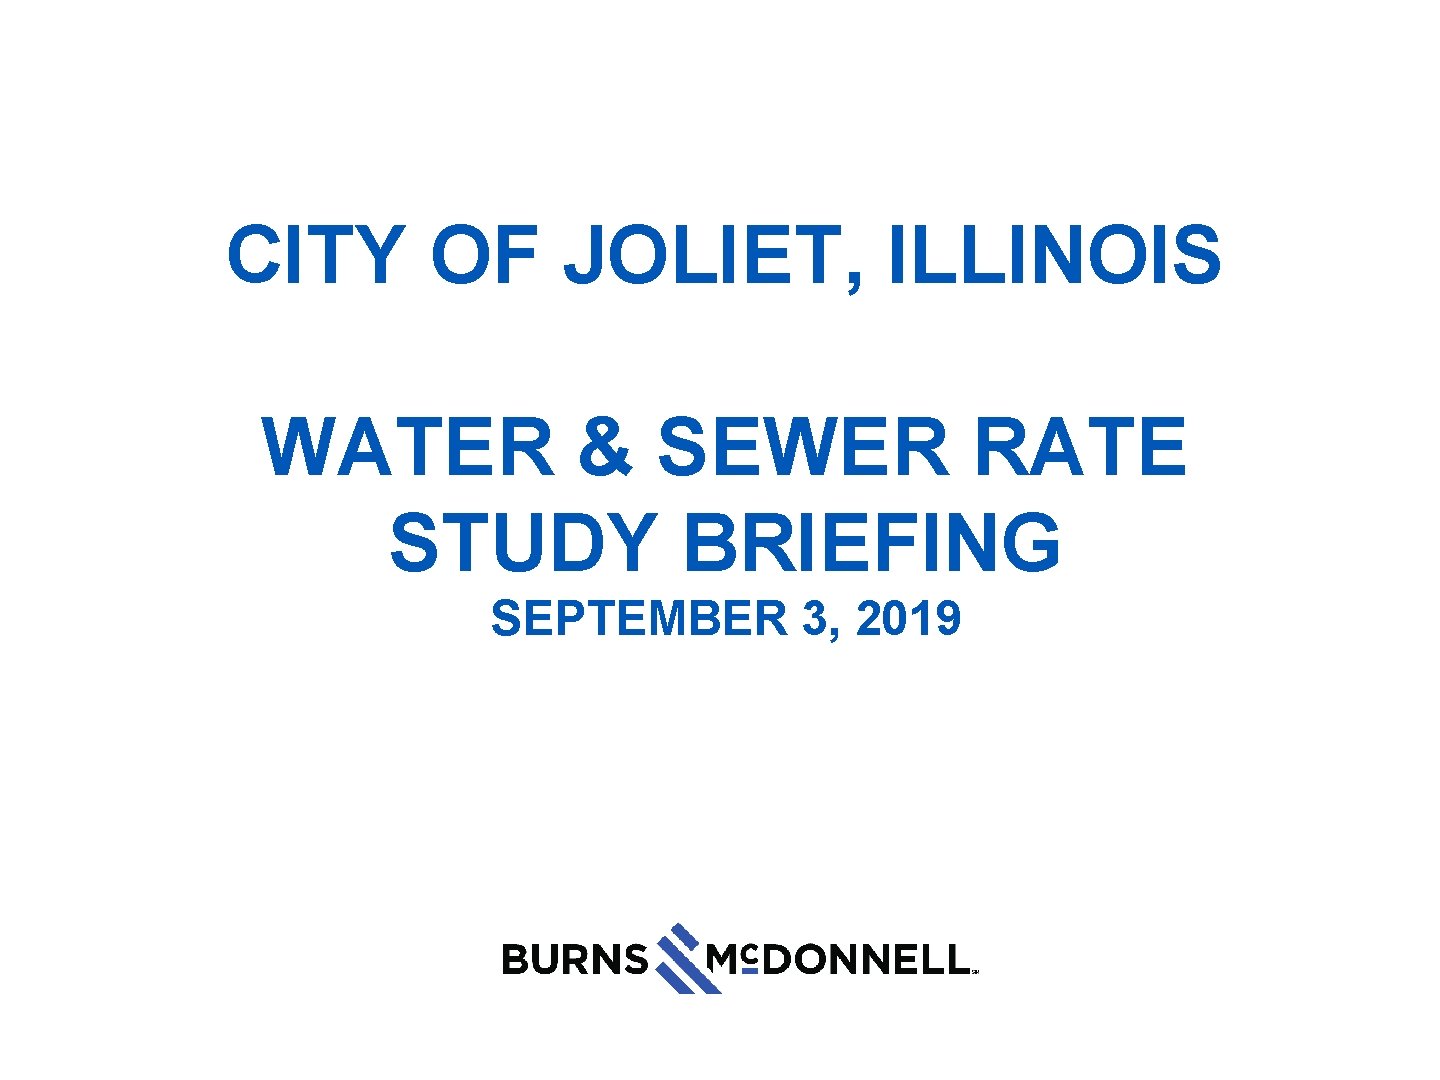 CITY OF JOLIET, ILLINOIS WATER & SEWER RATE STUDY BRIEFING SEPTEMBER 3, 2019 